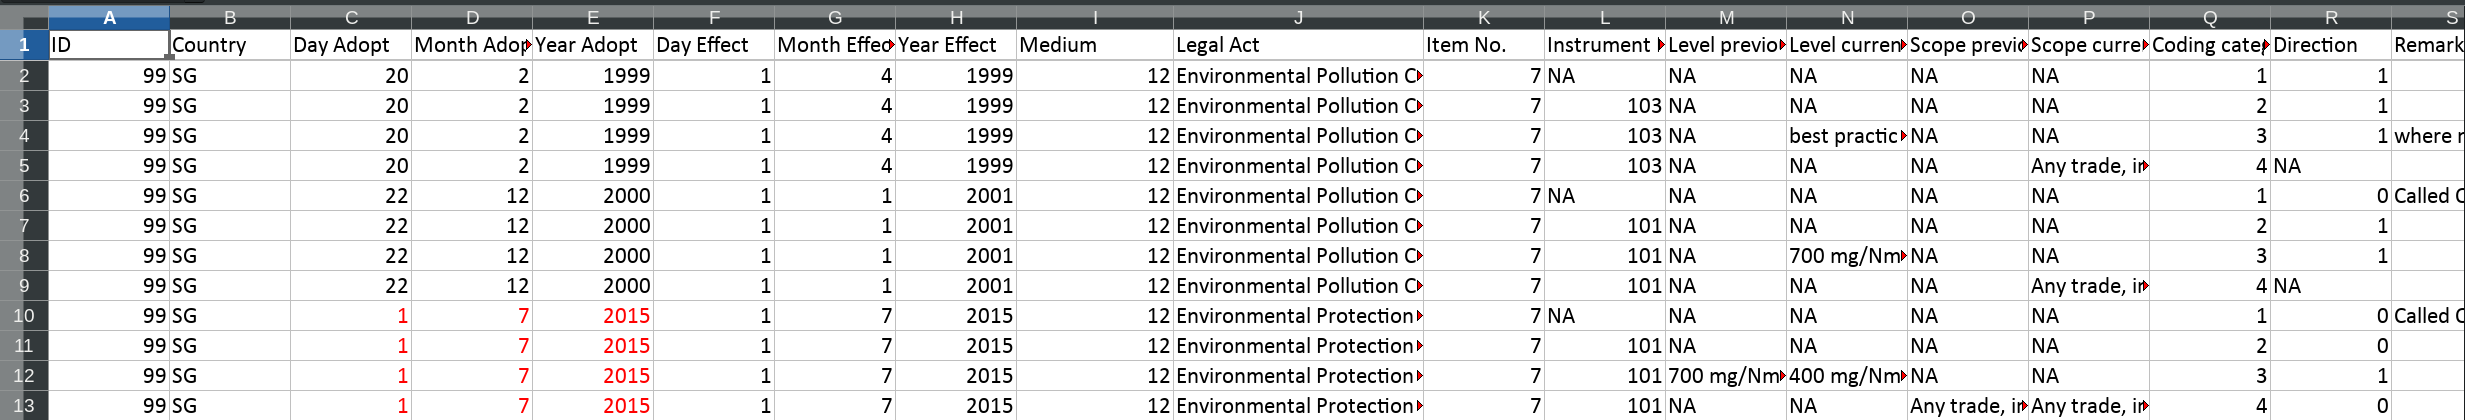 Example of a spreadsheet collecting data for the environmental portfolio of Singapore, following the guidelines and coding style of the CONSENSUS project.